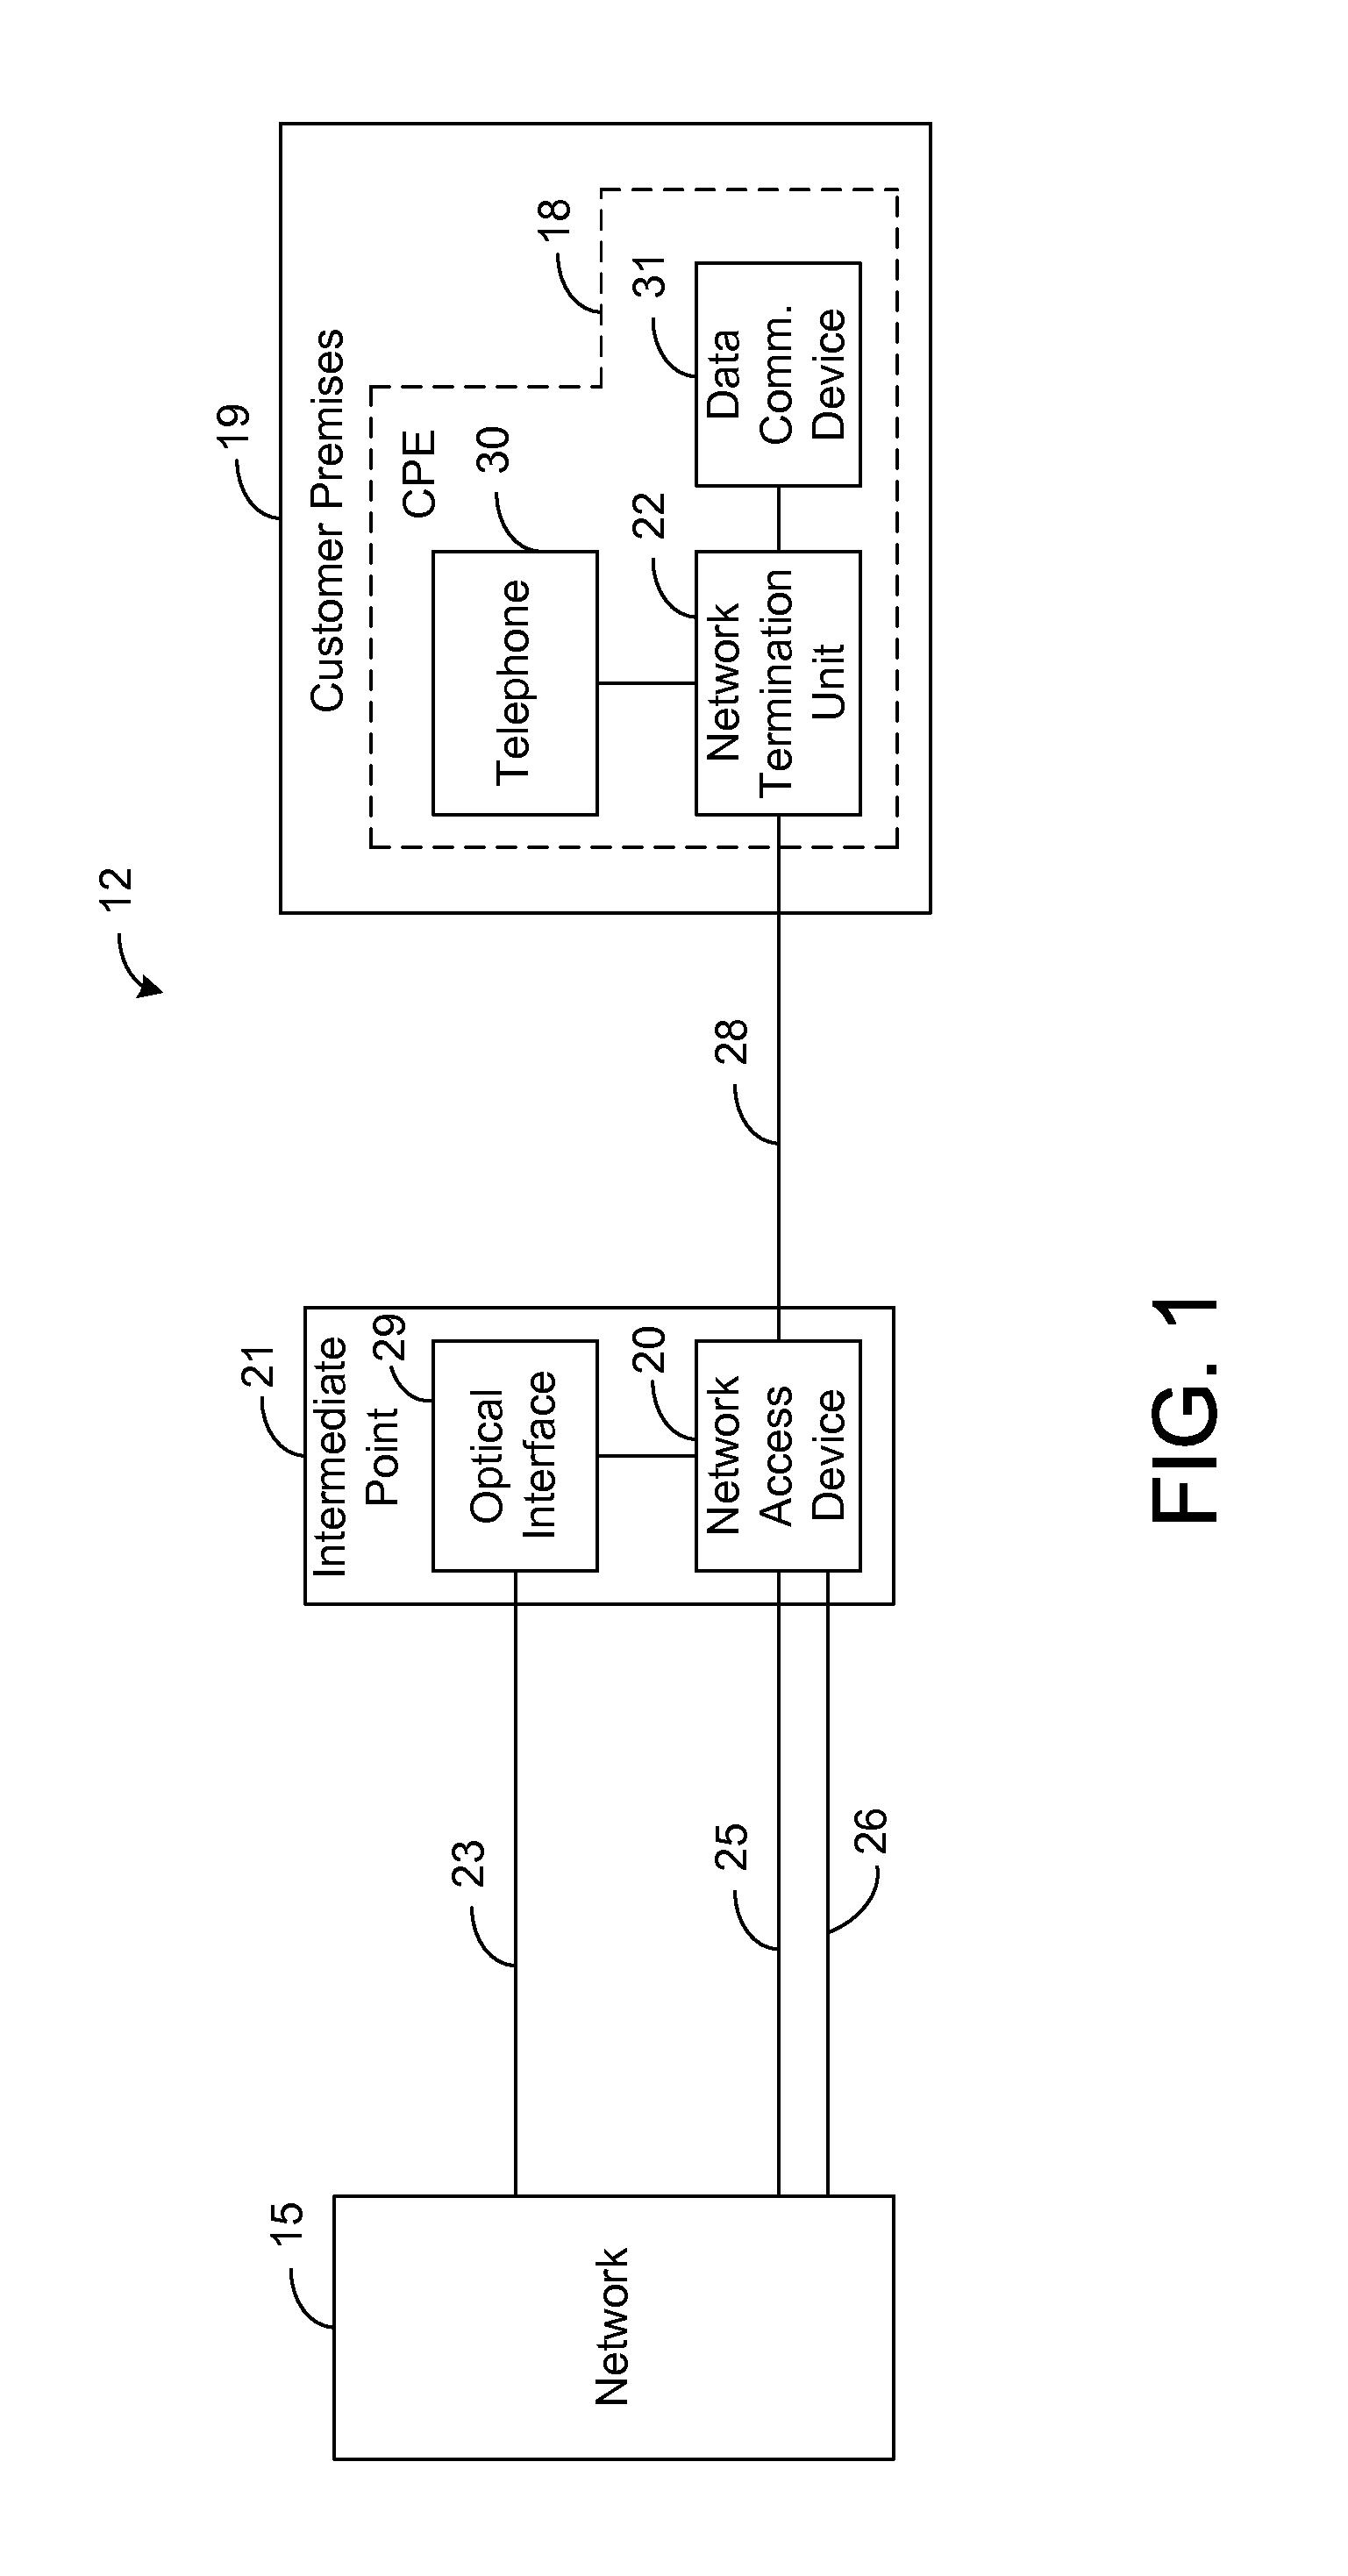 Systems and methods for powering network access devices from customer premises equipment